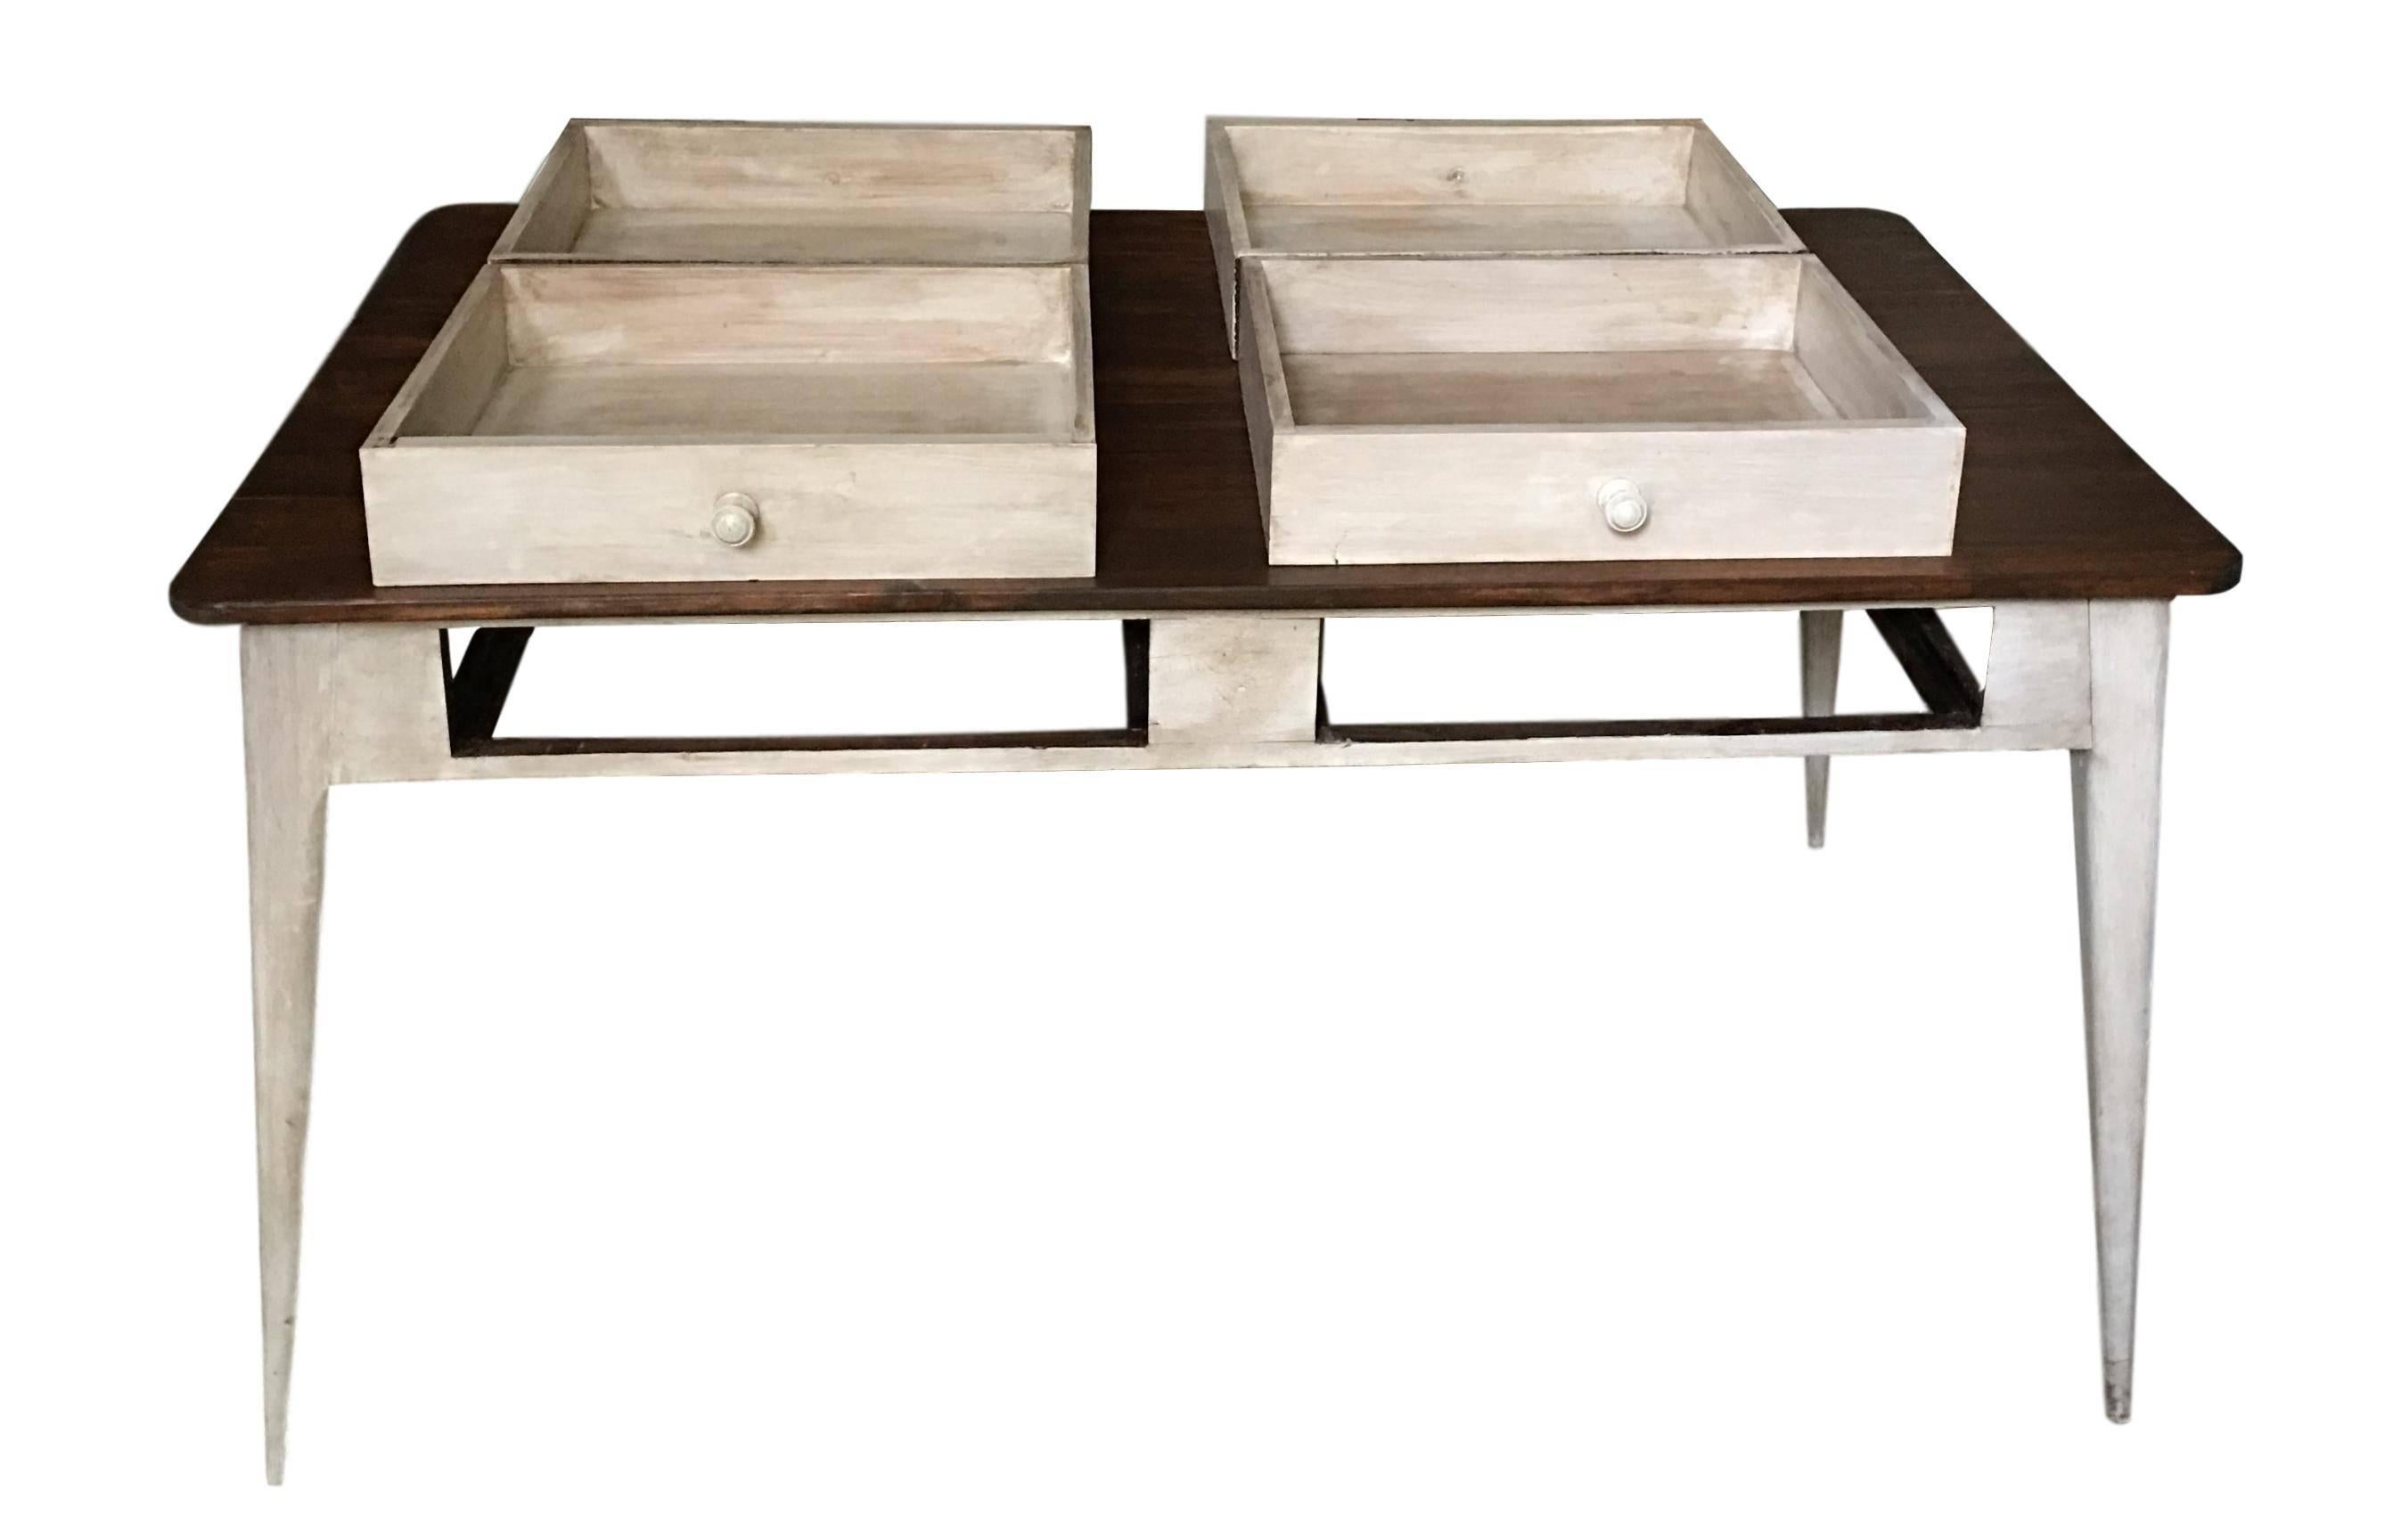 20th Century Dining Table or Partners Desk with Four Drawers in Antique White Patina, France